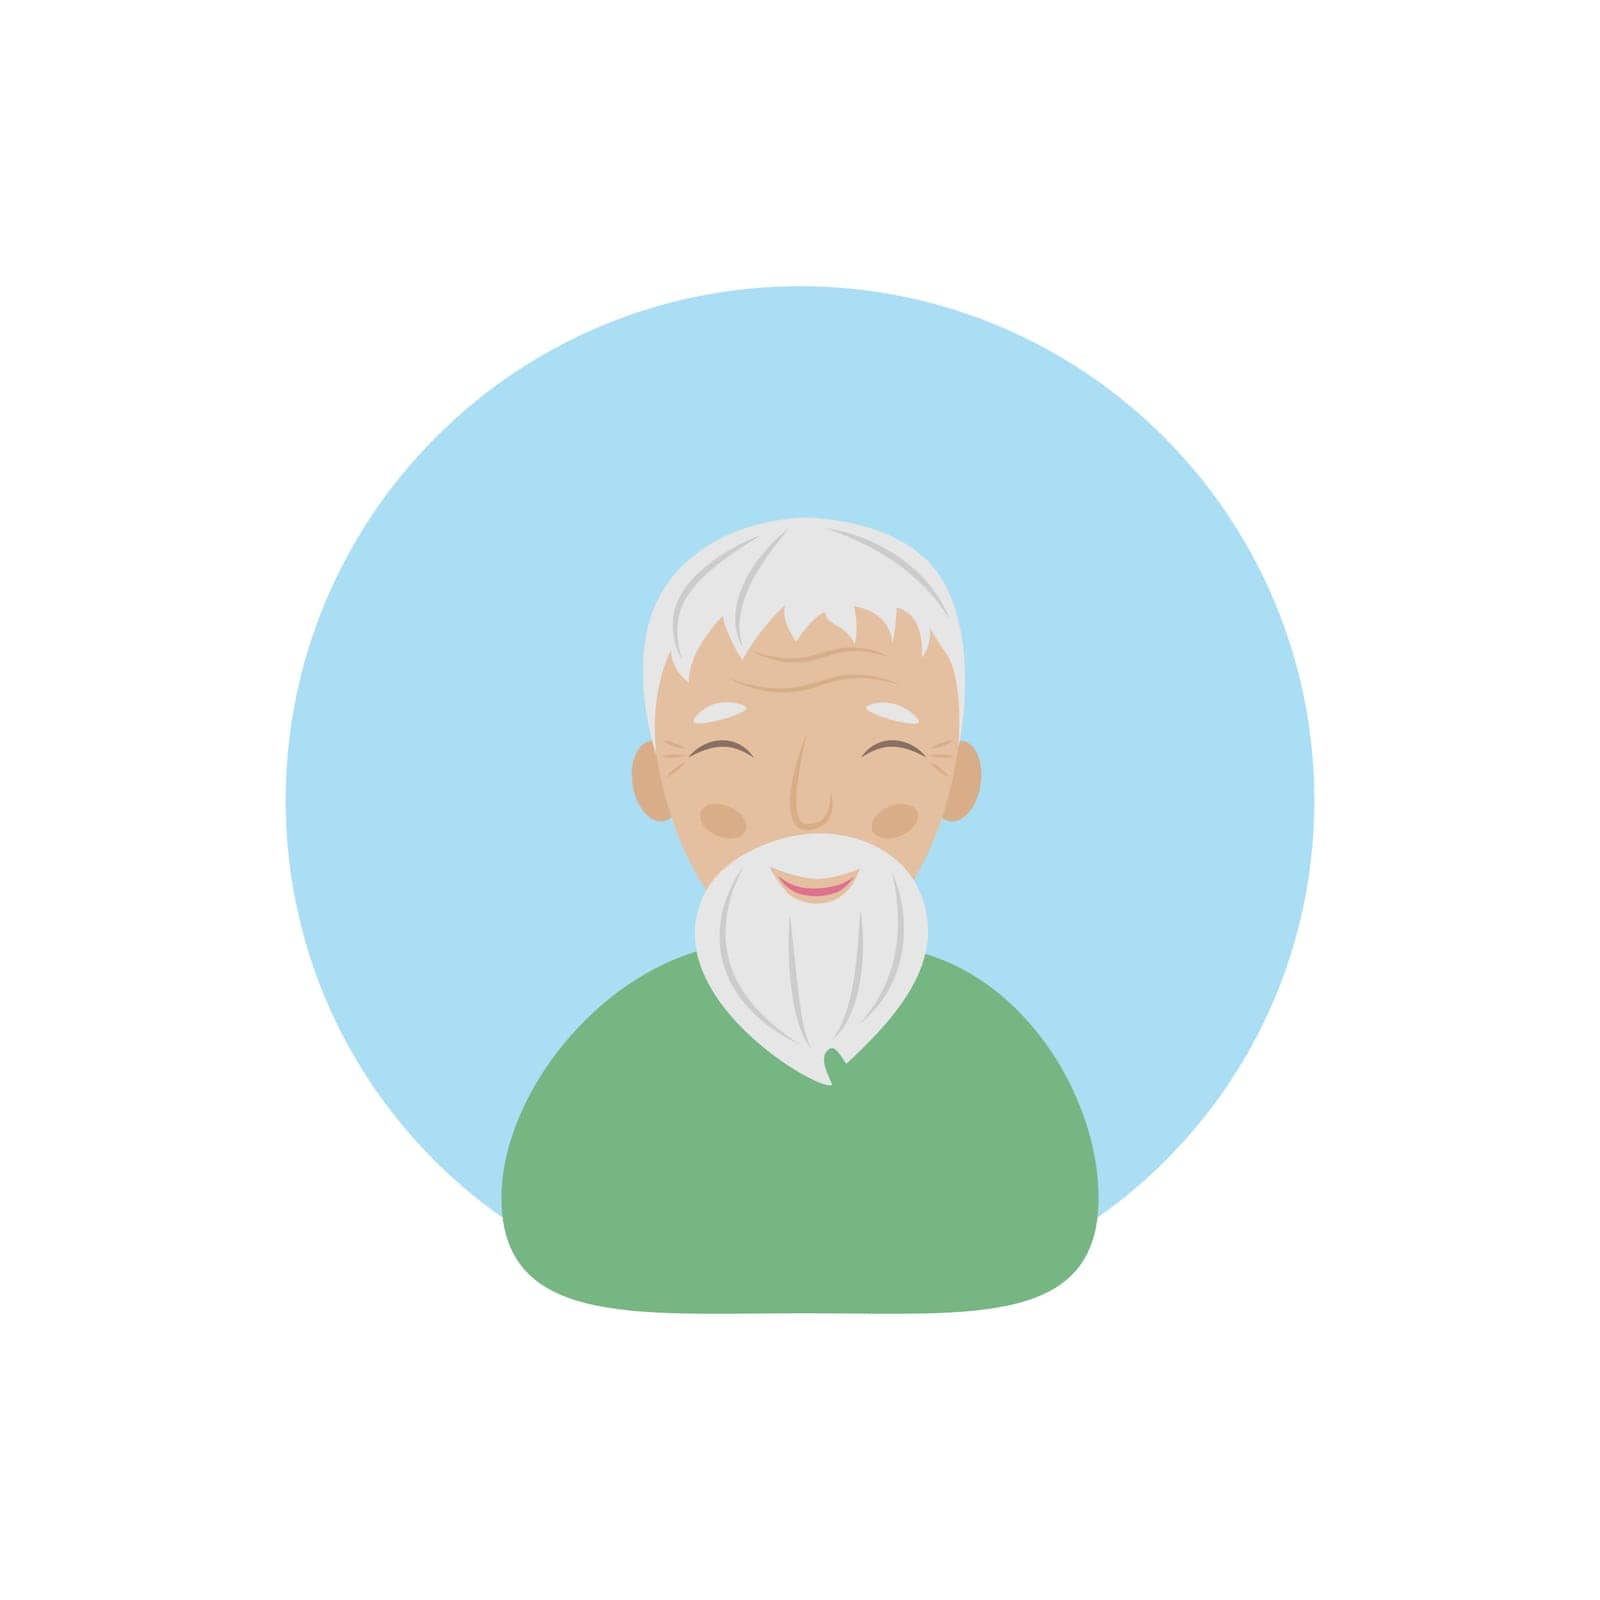 Grandfather. An old grandfather with gray hair and beard hair. Grandfather s avatar in cartoon style. Vector illustration isolated on a white background.